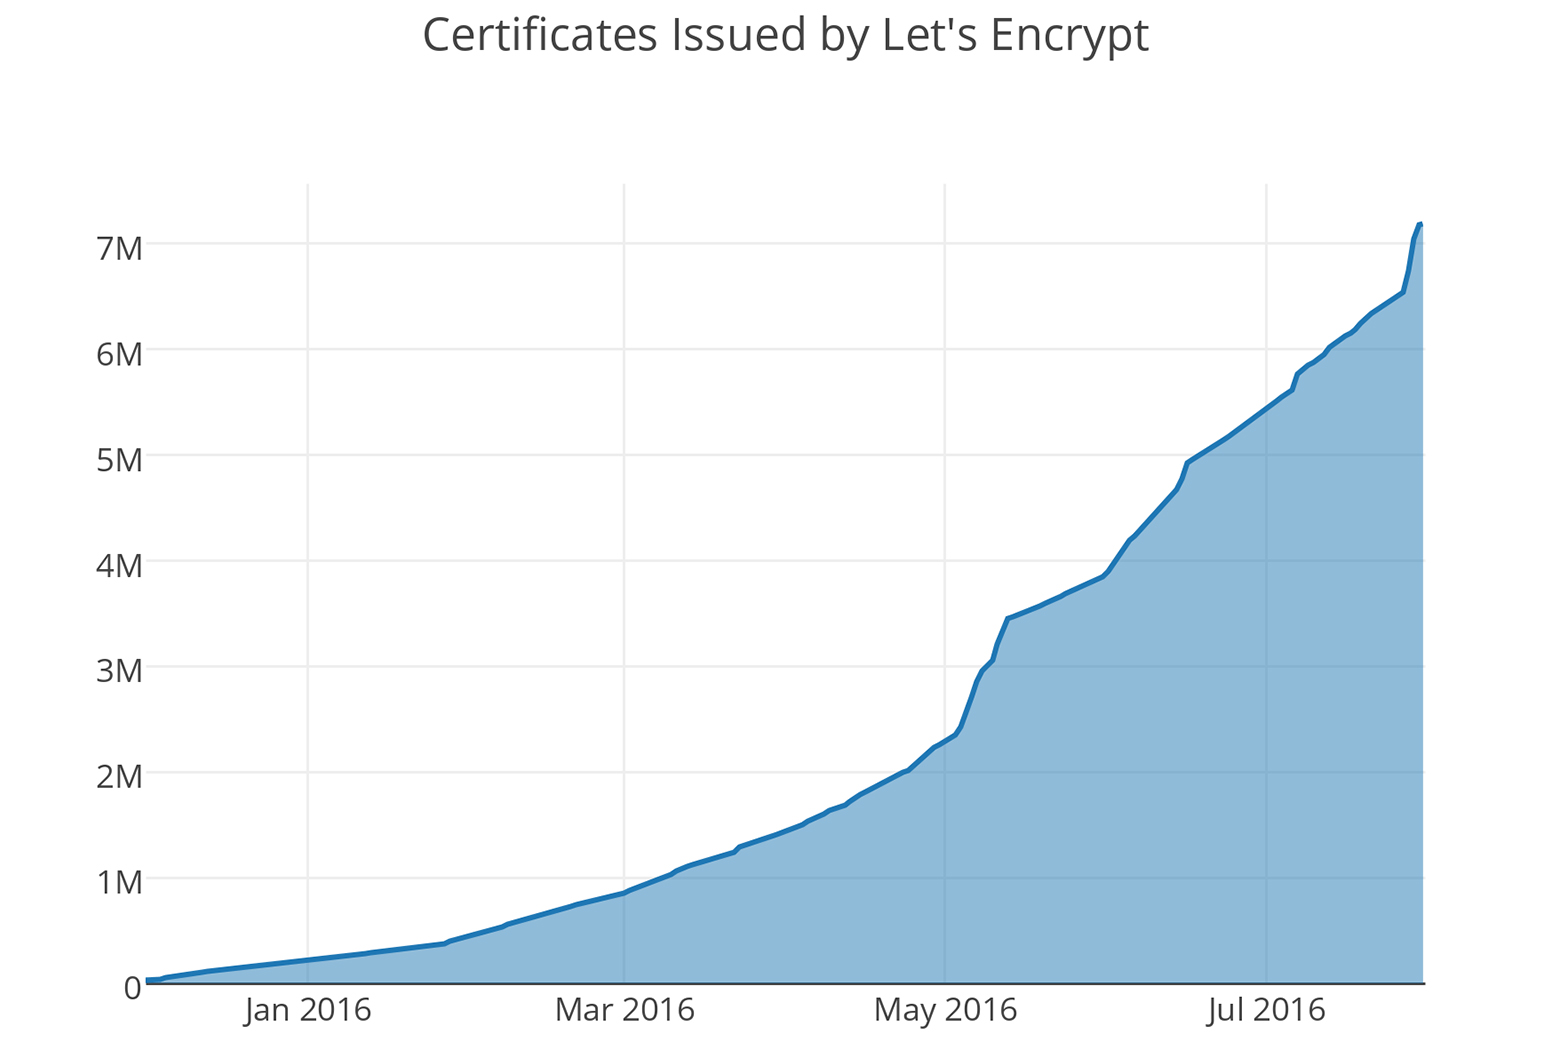 Let's Encrypt issued its 7 millionth certificate on July 29, 2016